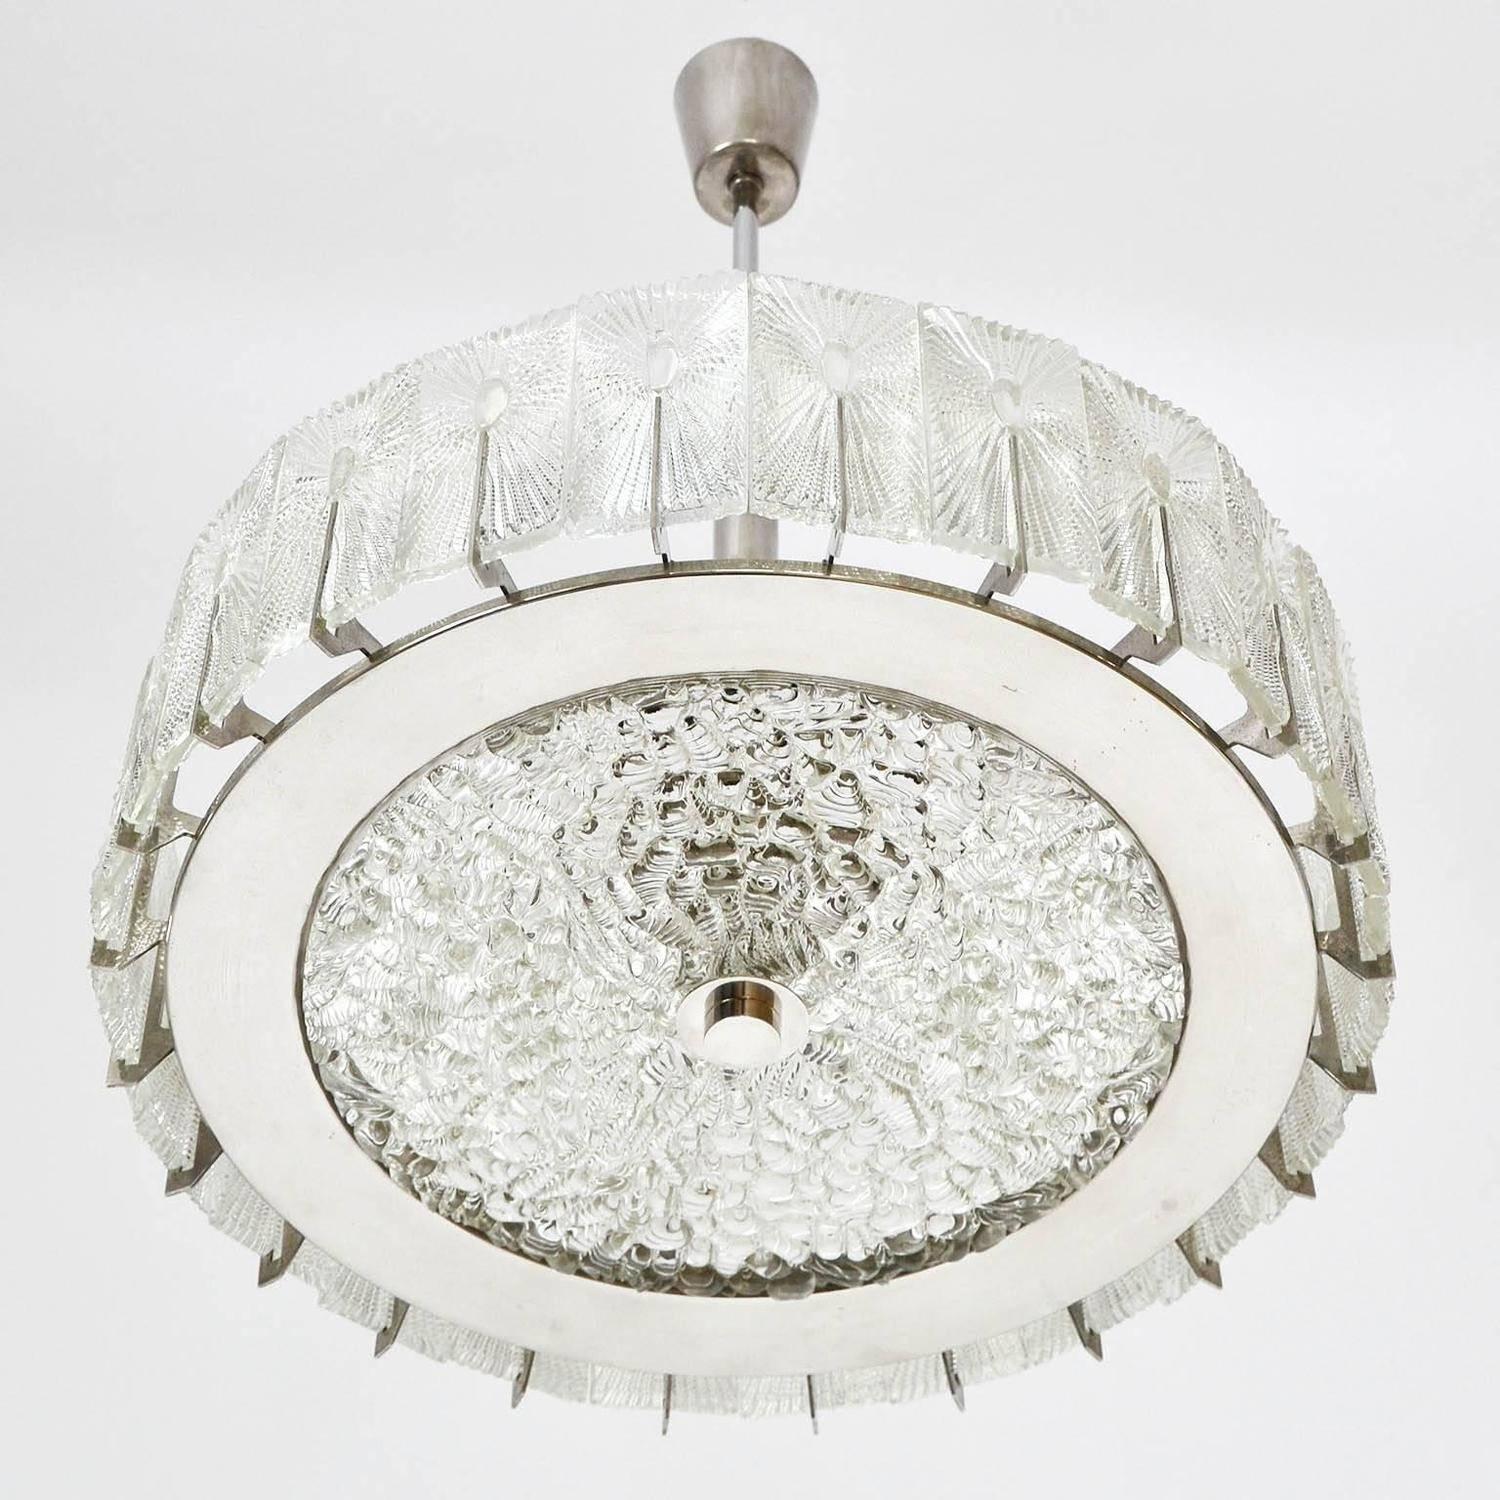 Mid-Century Modern Chandelier by Rupert Nikoll, Textured Glass and Nickel, 1960 For Sale